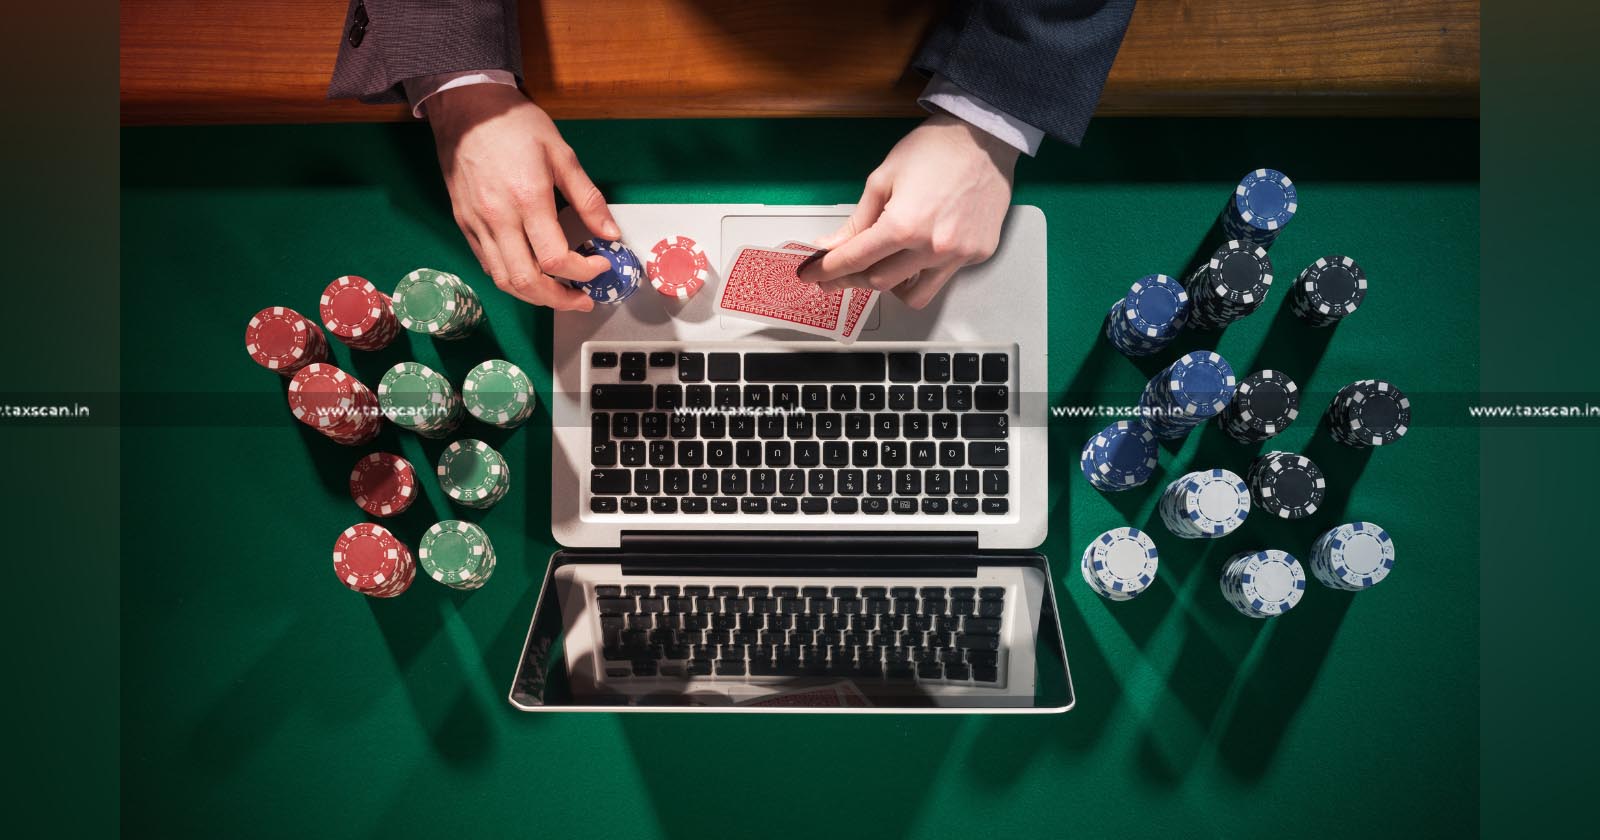 Super Easy Simple Ways The Pros Use To Promote canadian online casinos